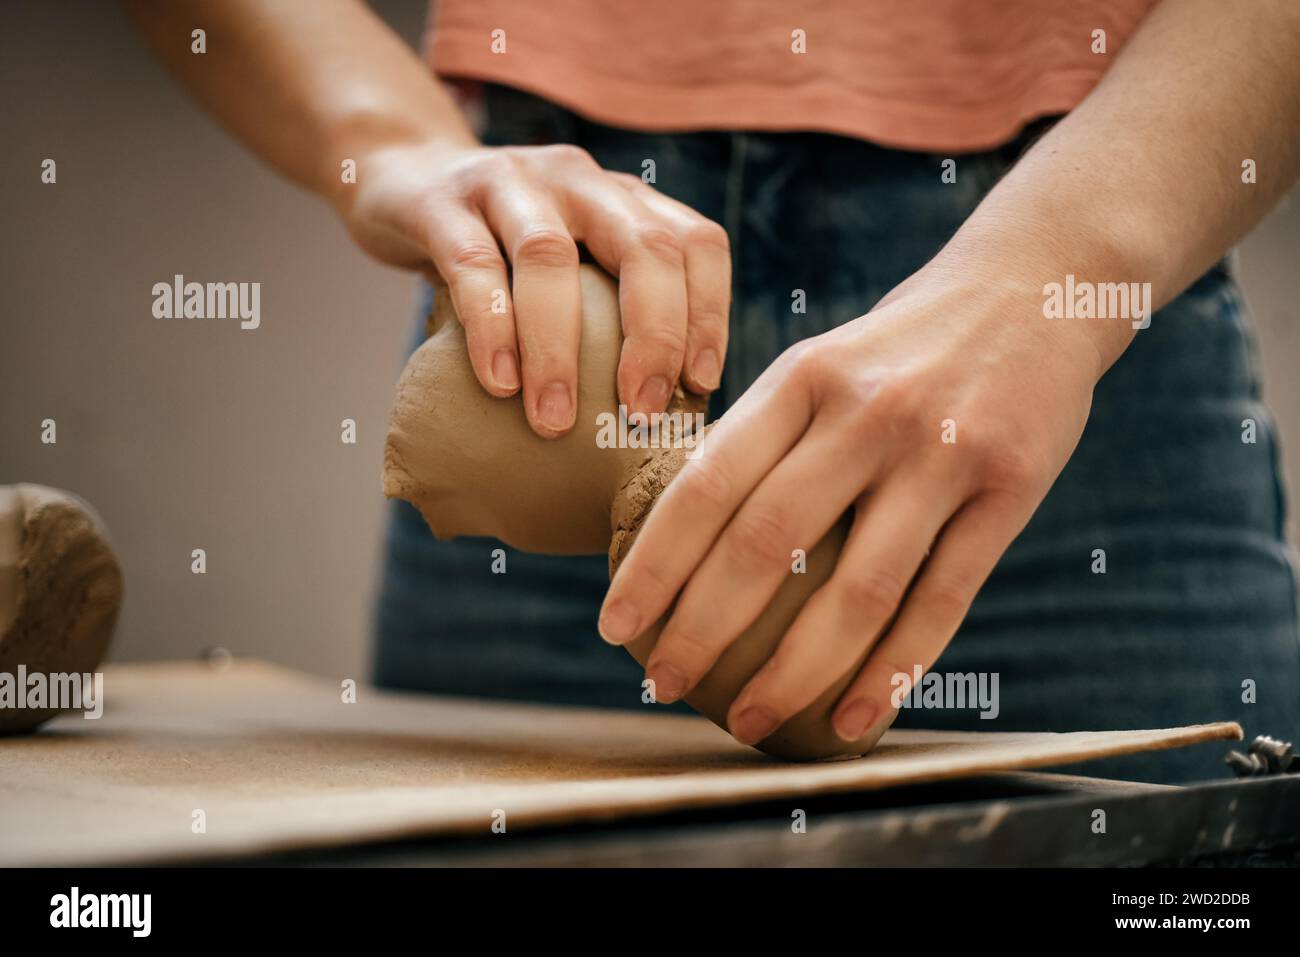 Cramists hands tear, divide soft, raw white clay into pieces Stock Photo